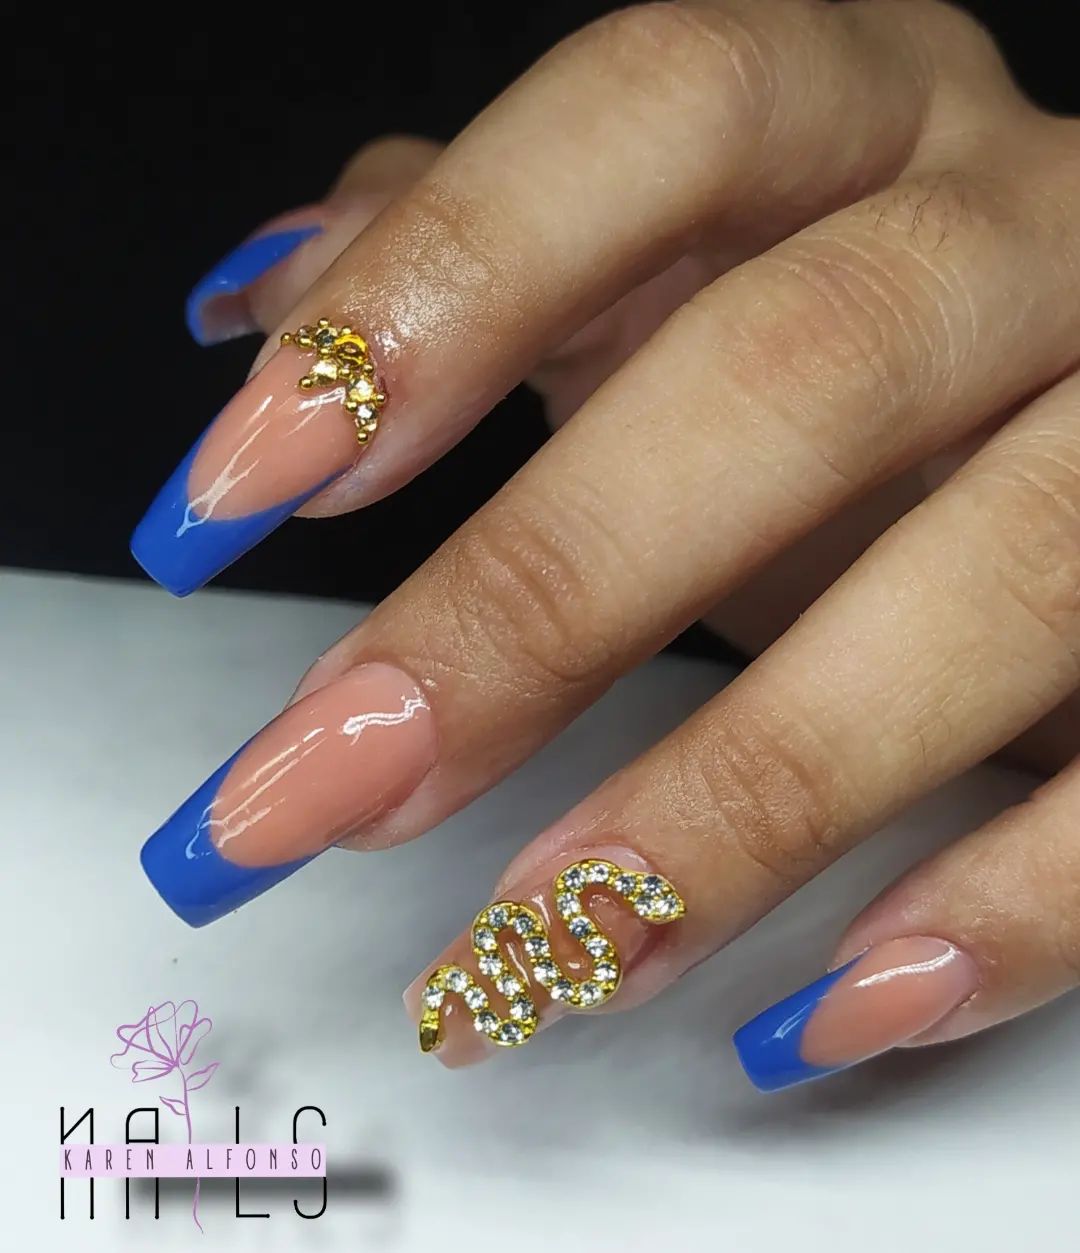 Blue French nail tips with a pop of gold are common and popular nails for the prom! If you like elegance this combo will suit you.